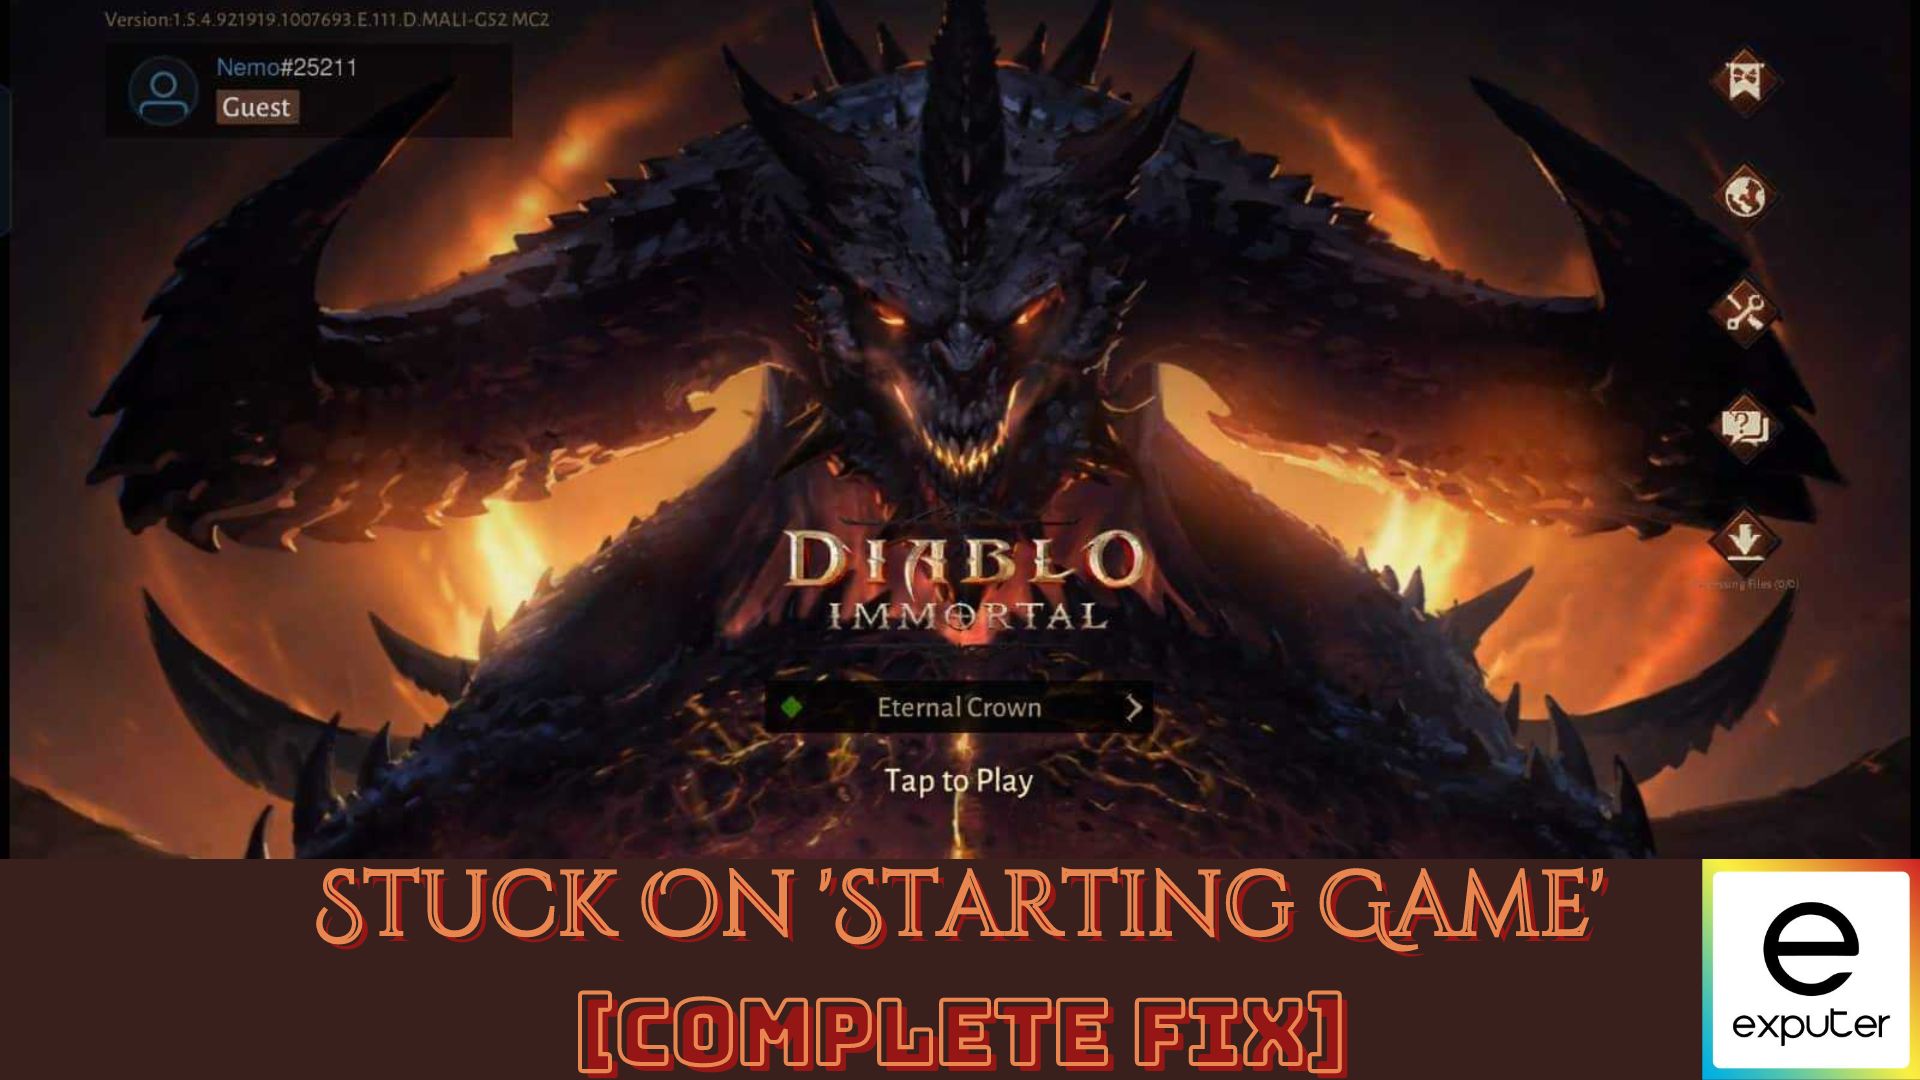 THESE POPUPS EVERY TIME I LAUNCH THE GAME ARE DRIVING ME INSANE : r/ DiabloImmortal